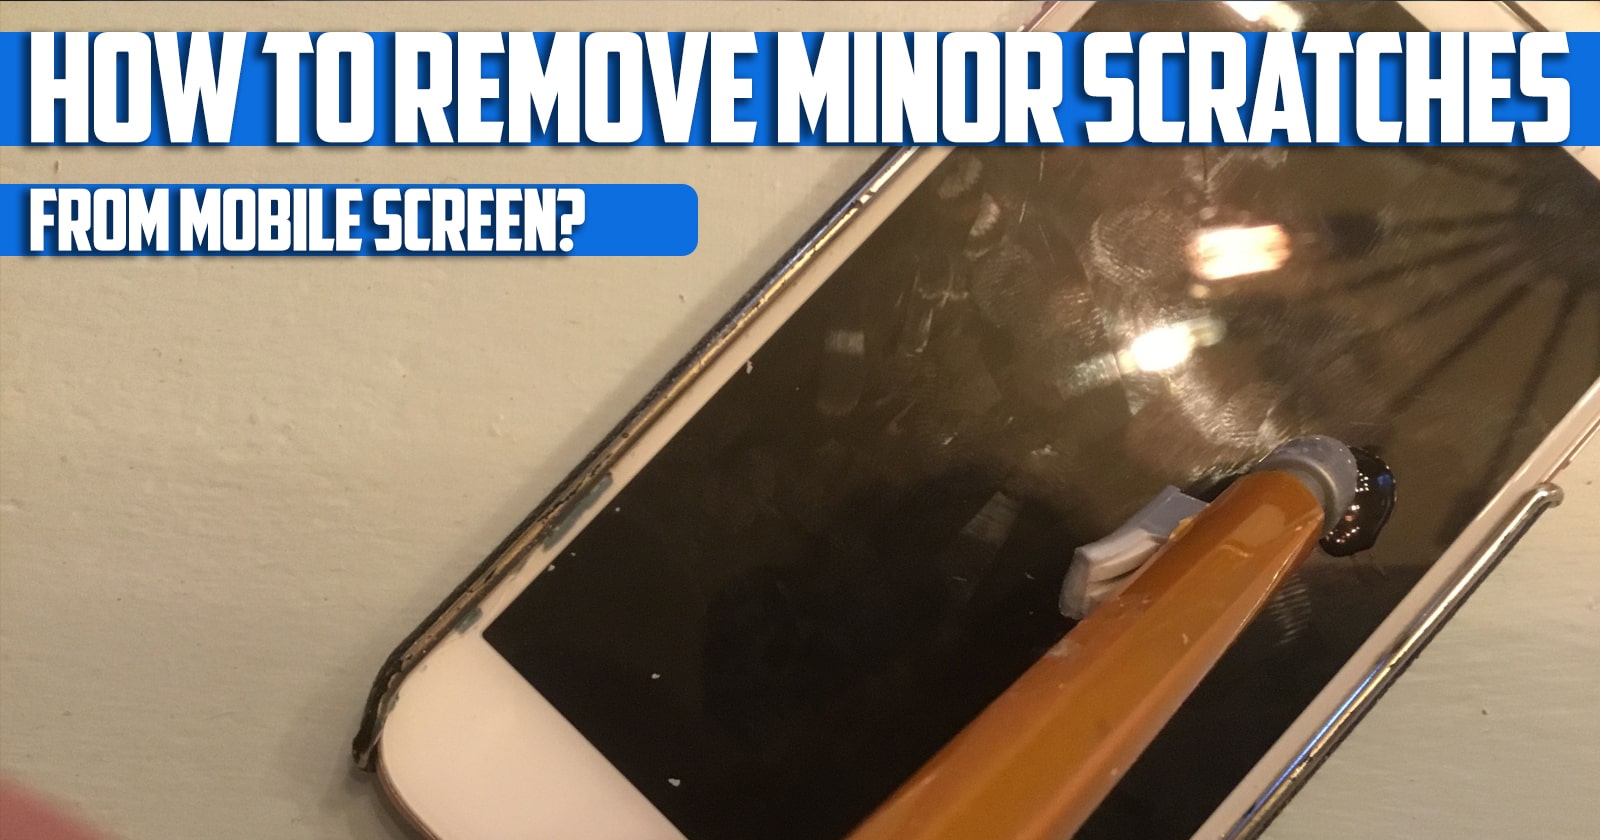 How to remove minor scratches from mobile screen